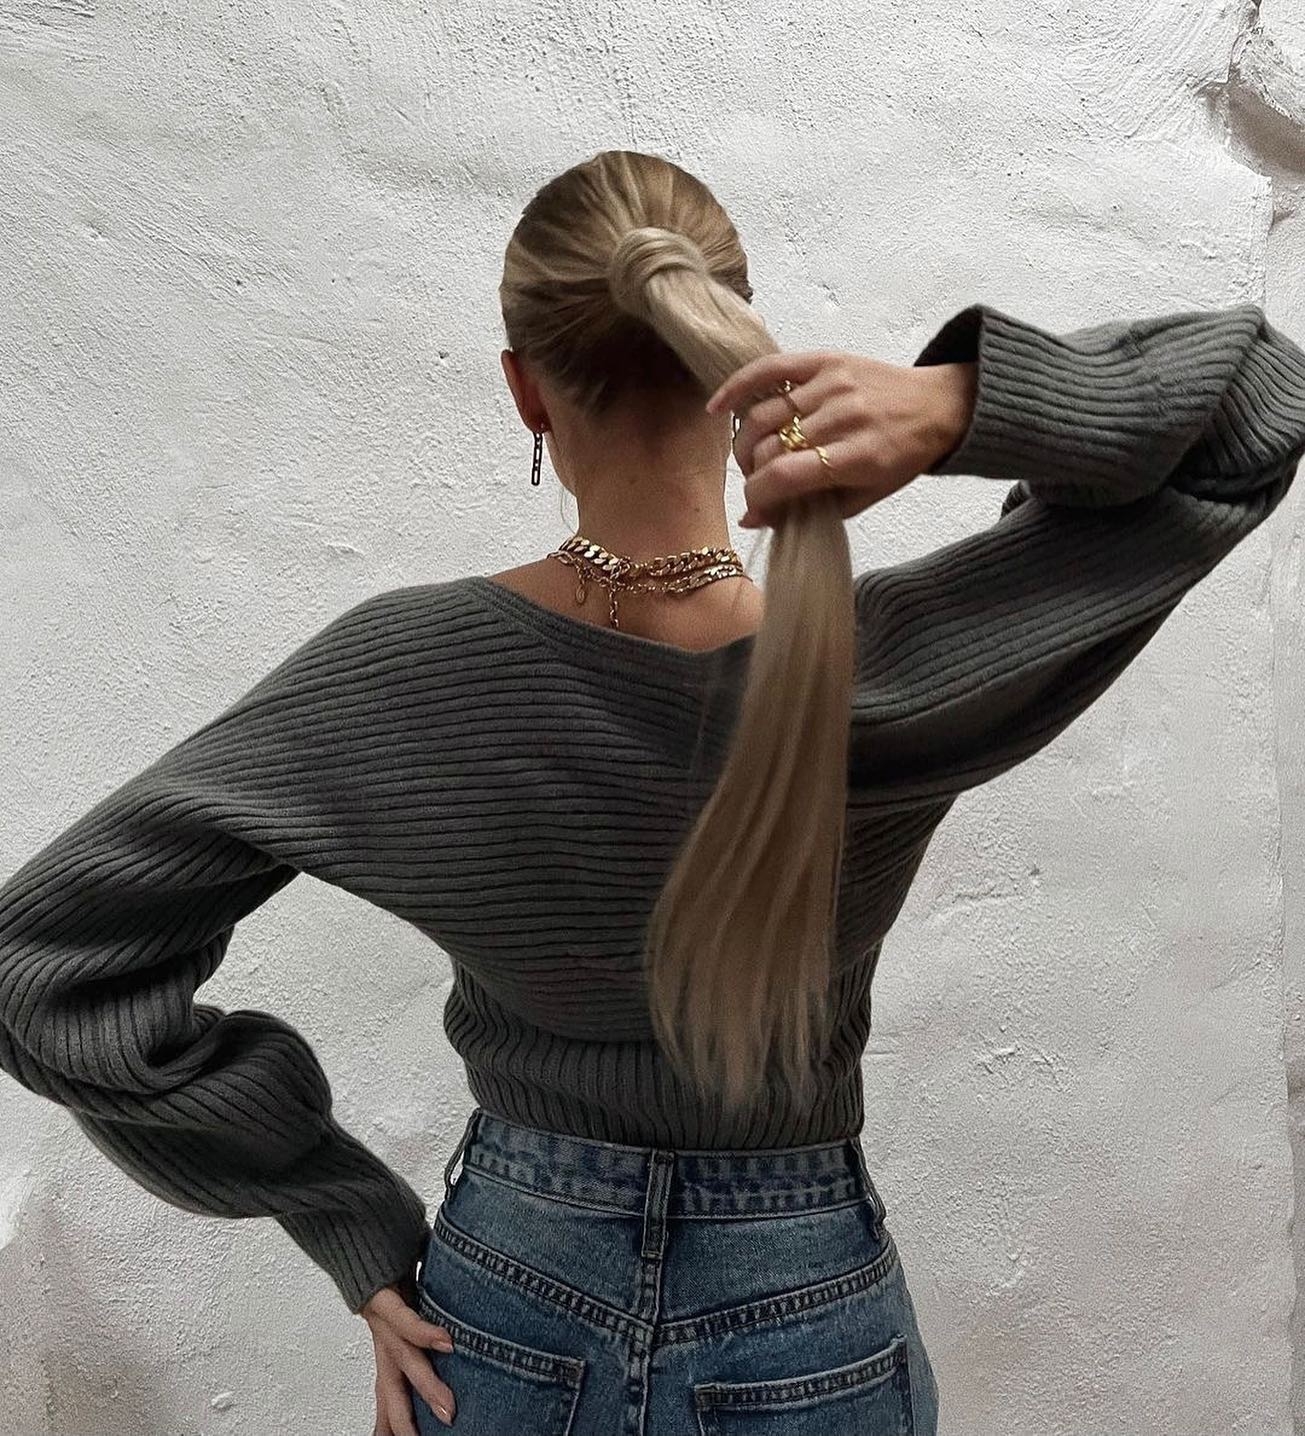 Photo from rapunzelofsweden with the caption Don’t miss out → Singles Day 15% OFF! @ninastrauss looks amazing in Sleek Clip-in Ponytail in colour M7.3/10.8🍦
-
#Rapunzelofsweden #hairextensions #singlesday